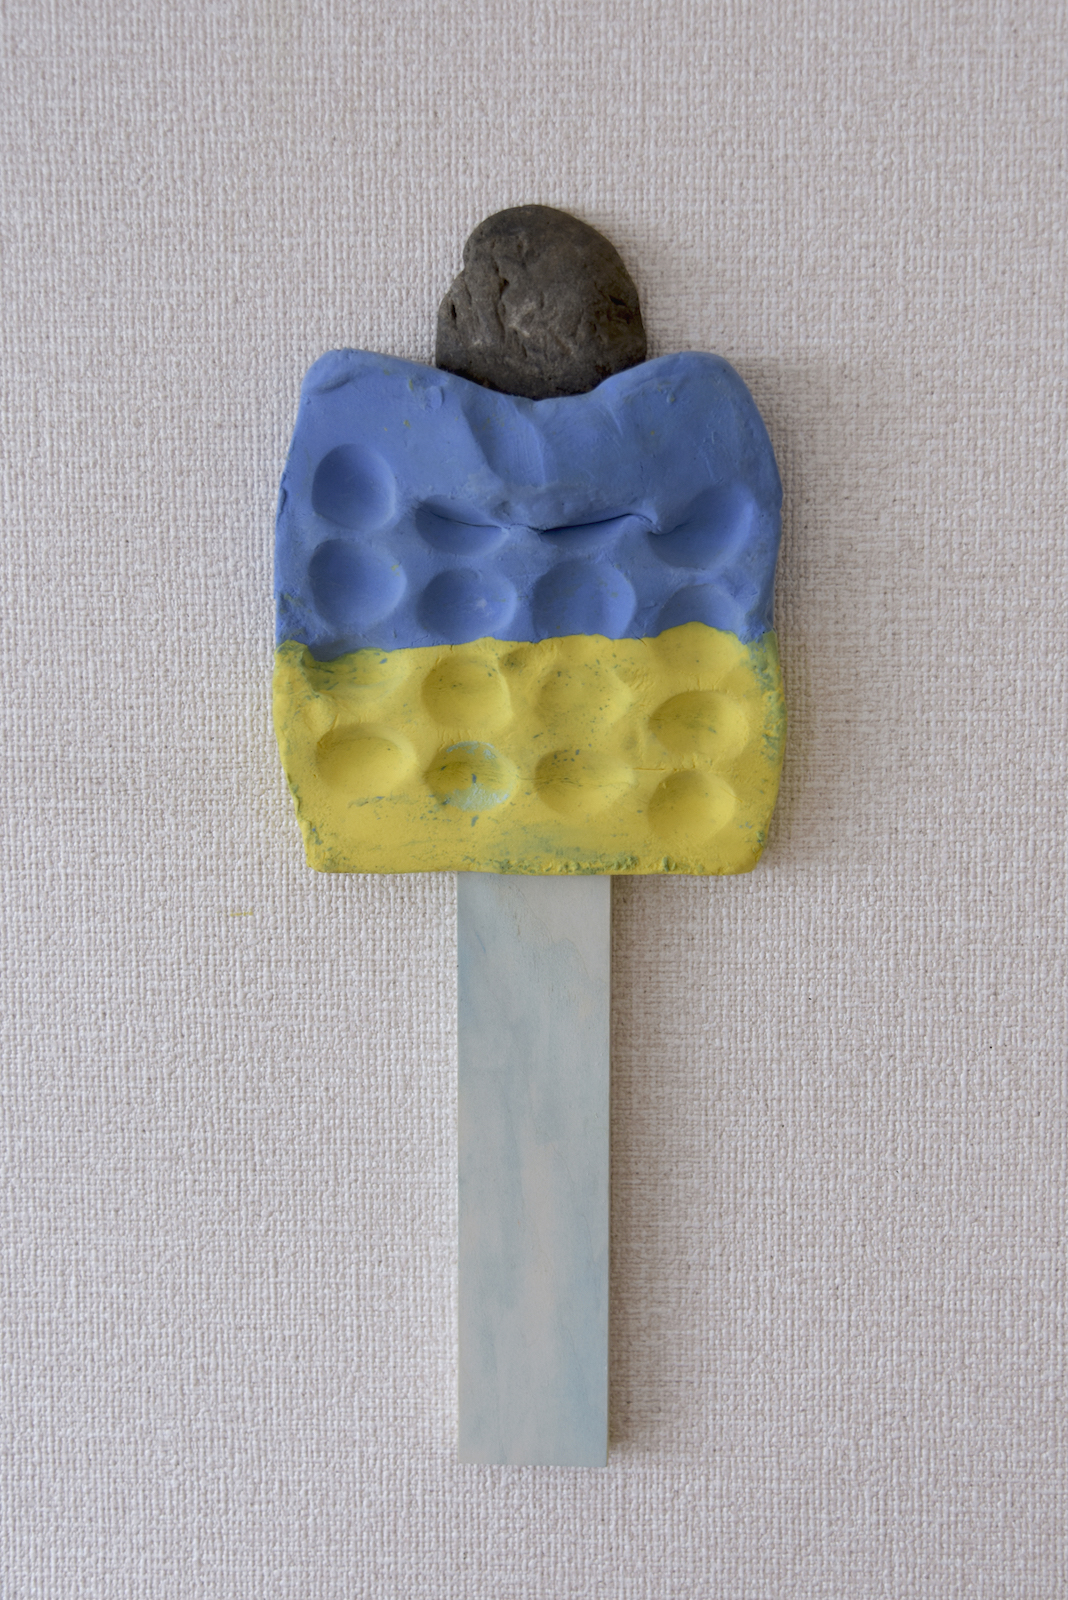 Squash (Point card), 2018, paper clay, acrylic paint on wood, rock.